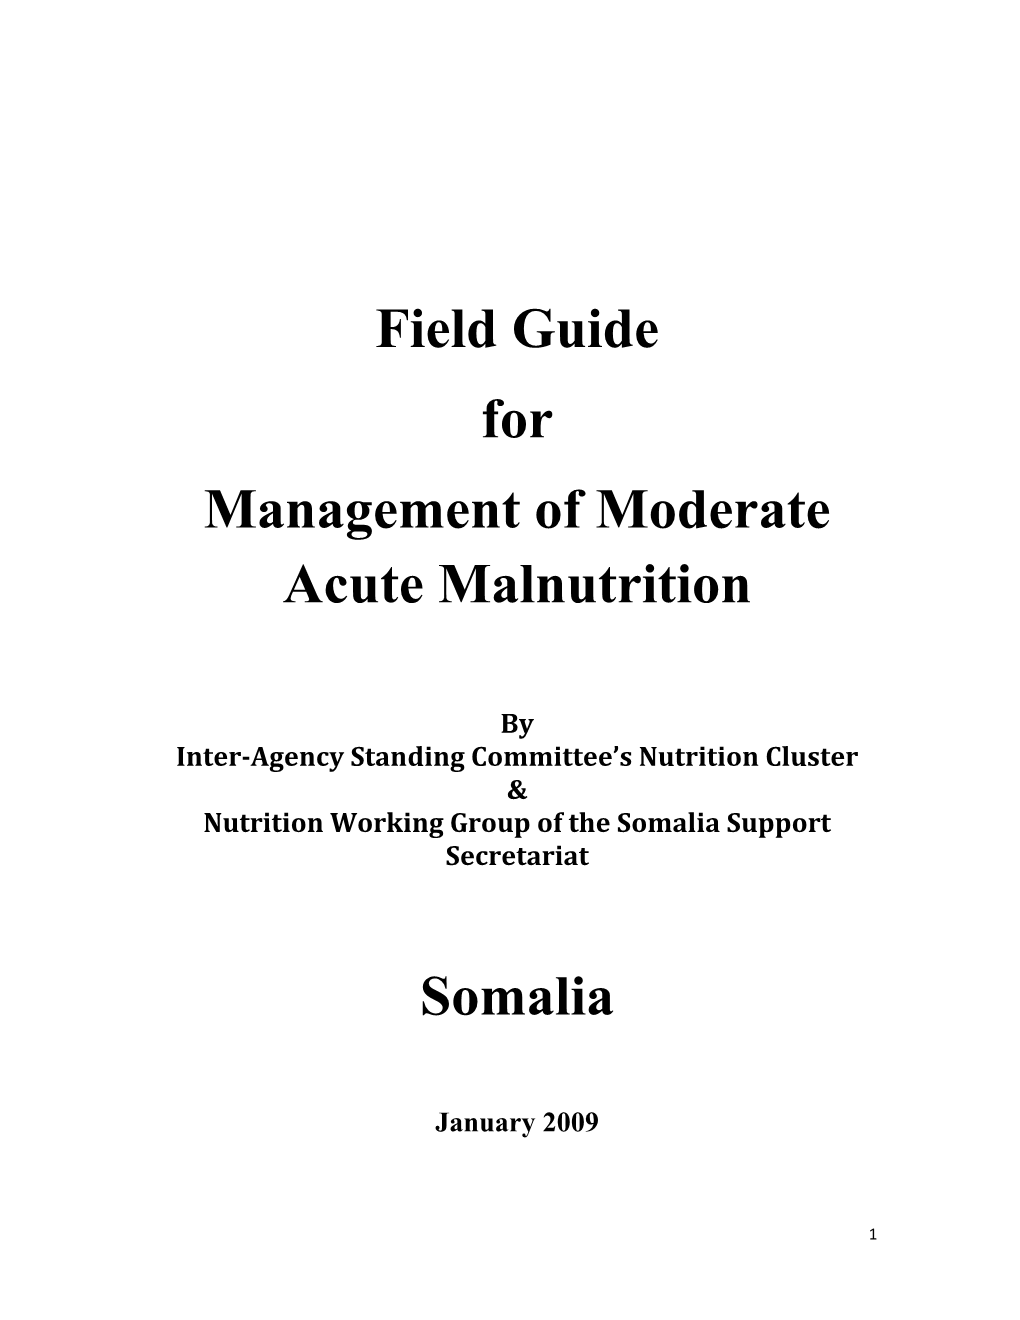 Field Guide for Management of Moderate Acute Malnutrition Somalia